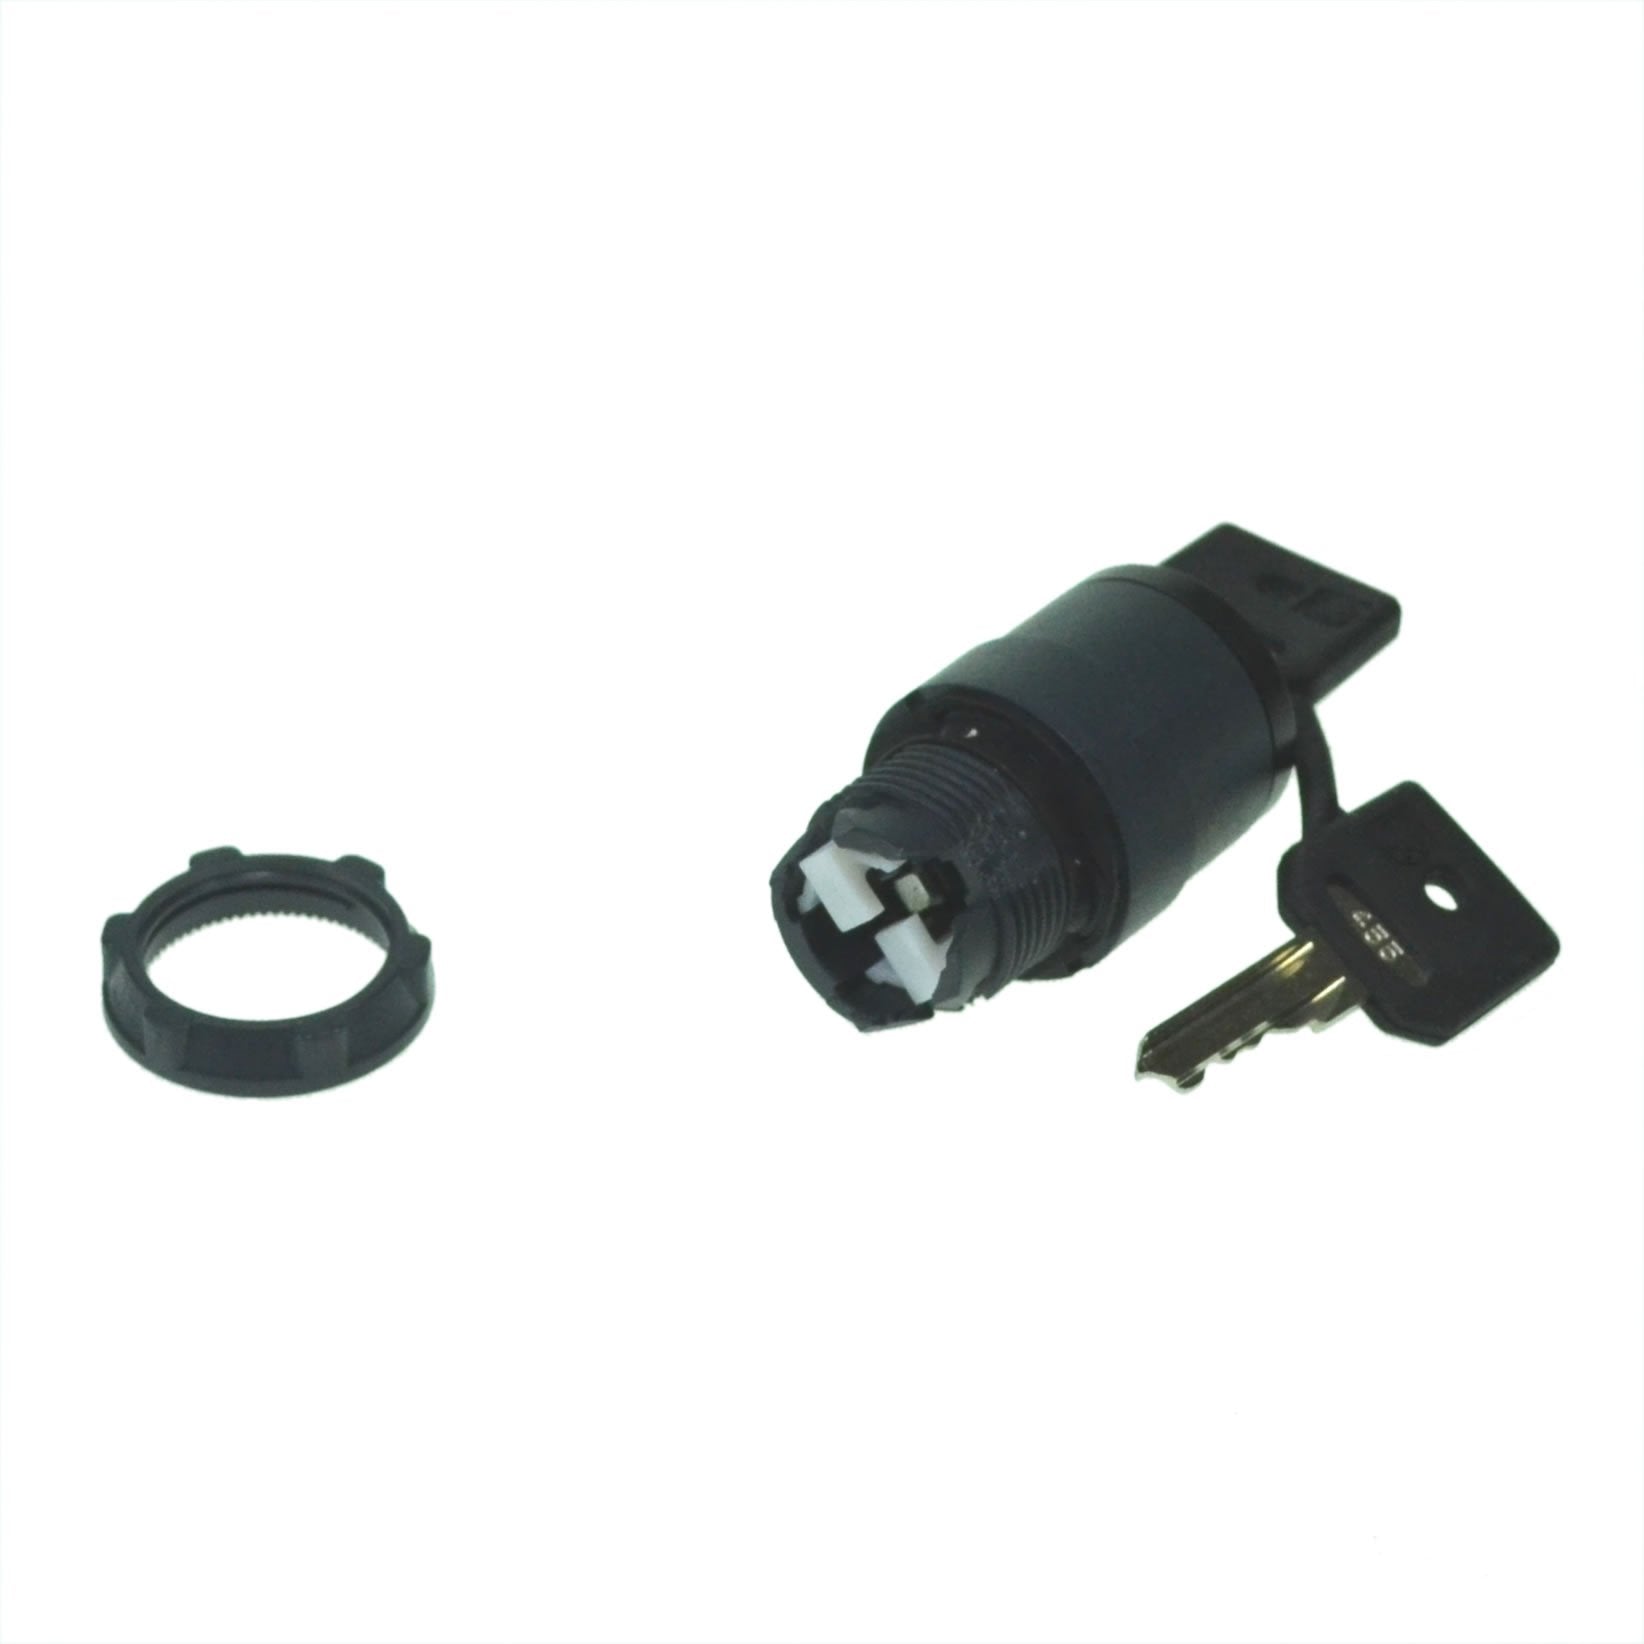 Two Position Key Selector Switch , Tail Lift Parts - Nationwide Trailer Parts, Nationwide Trailer Parts Ltd - 2